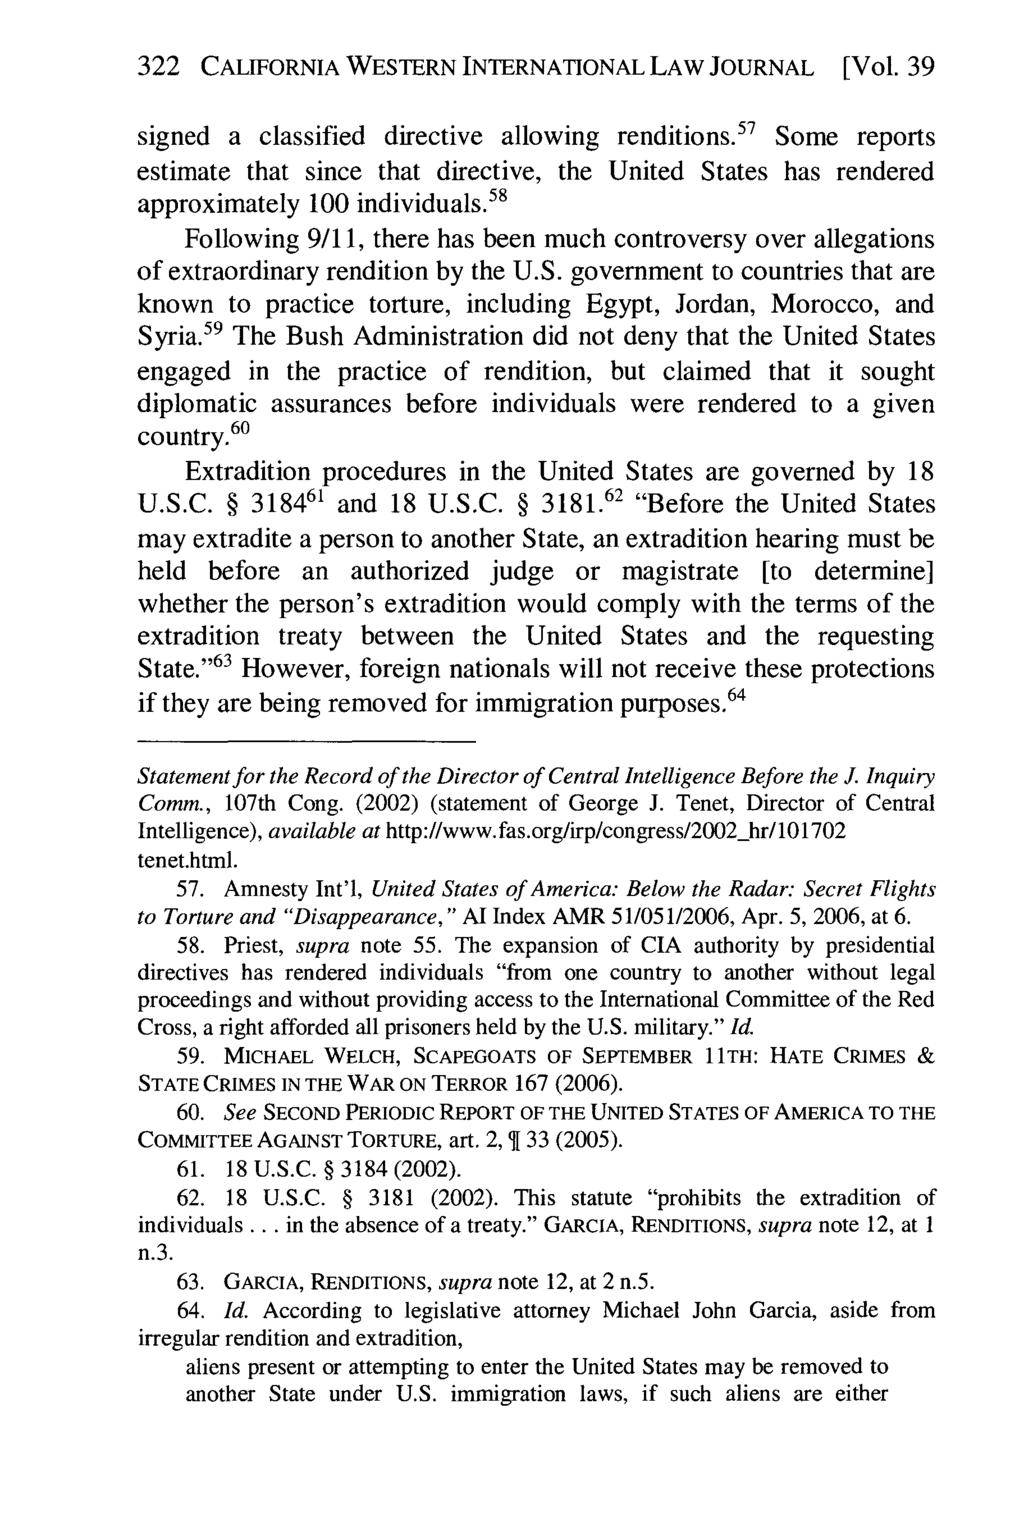 322 CALIFORNIA California Western WESTERN International INTERNATIONAL Law Journal, Vol. 39 [2008], LAW No. JOURNAL 2, Art. 4 [Vol. 39 signed a classified directive allowing renditions.